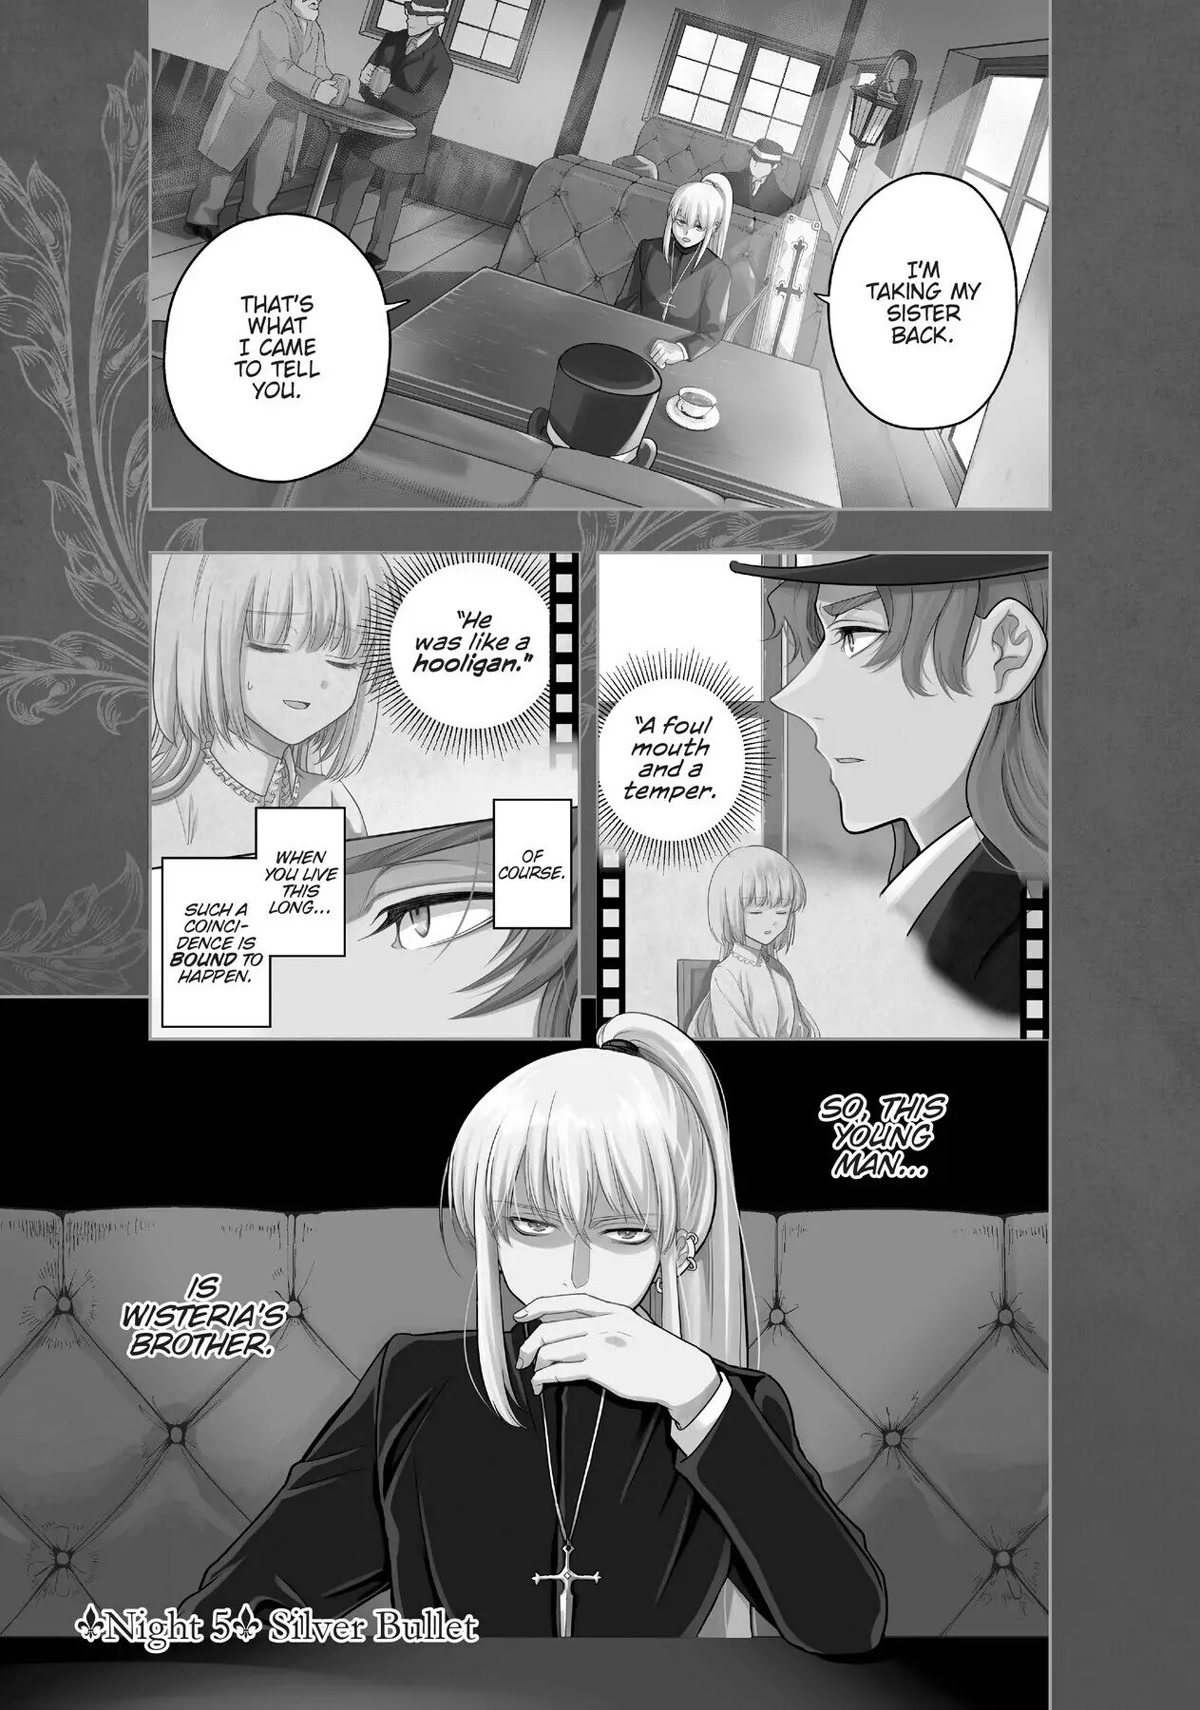 The Tale Of The Outcasts - Page 1